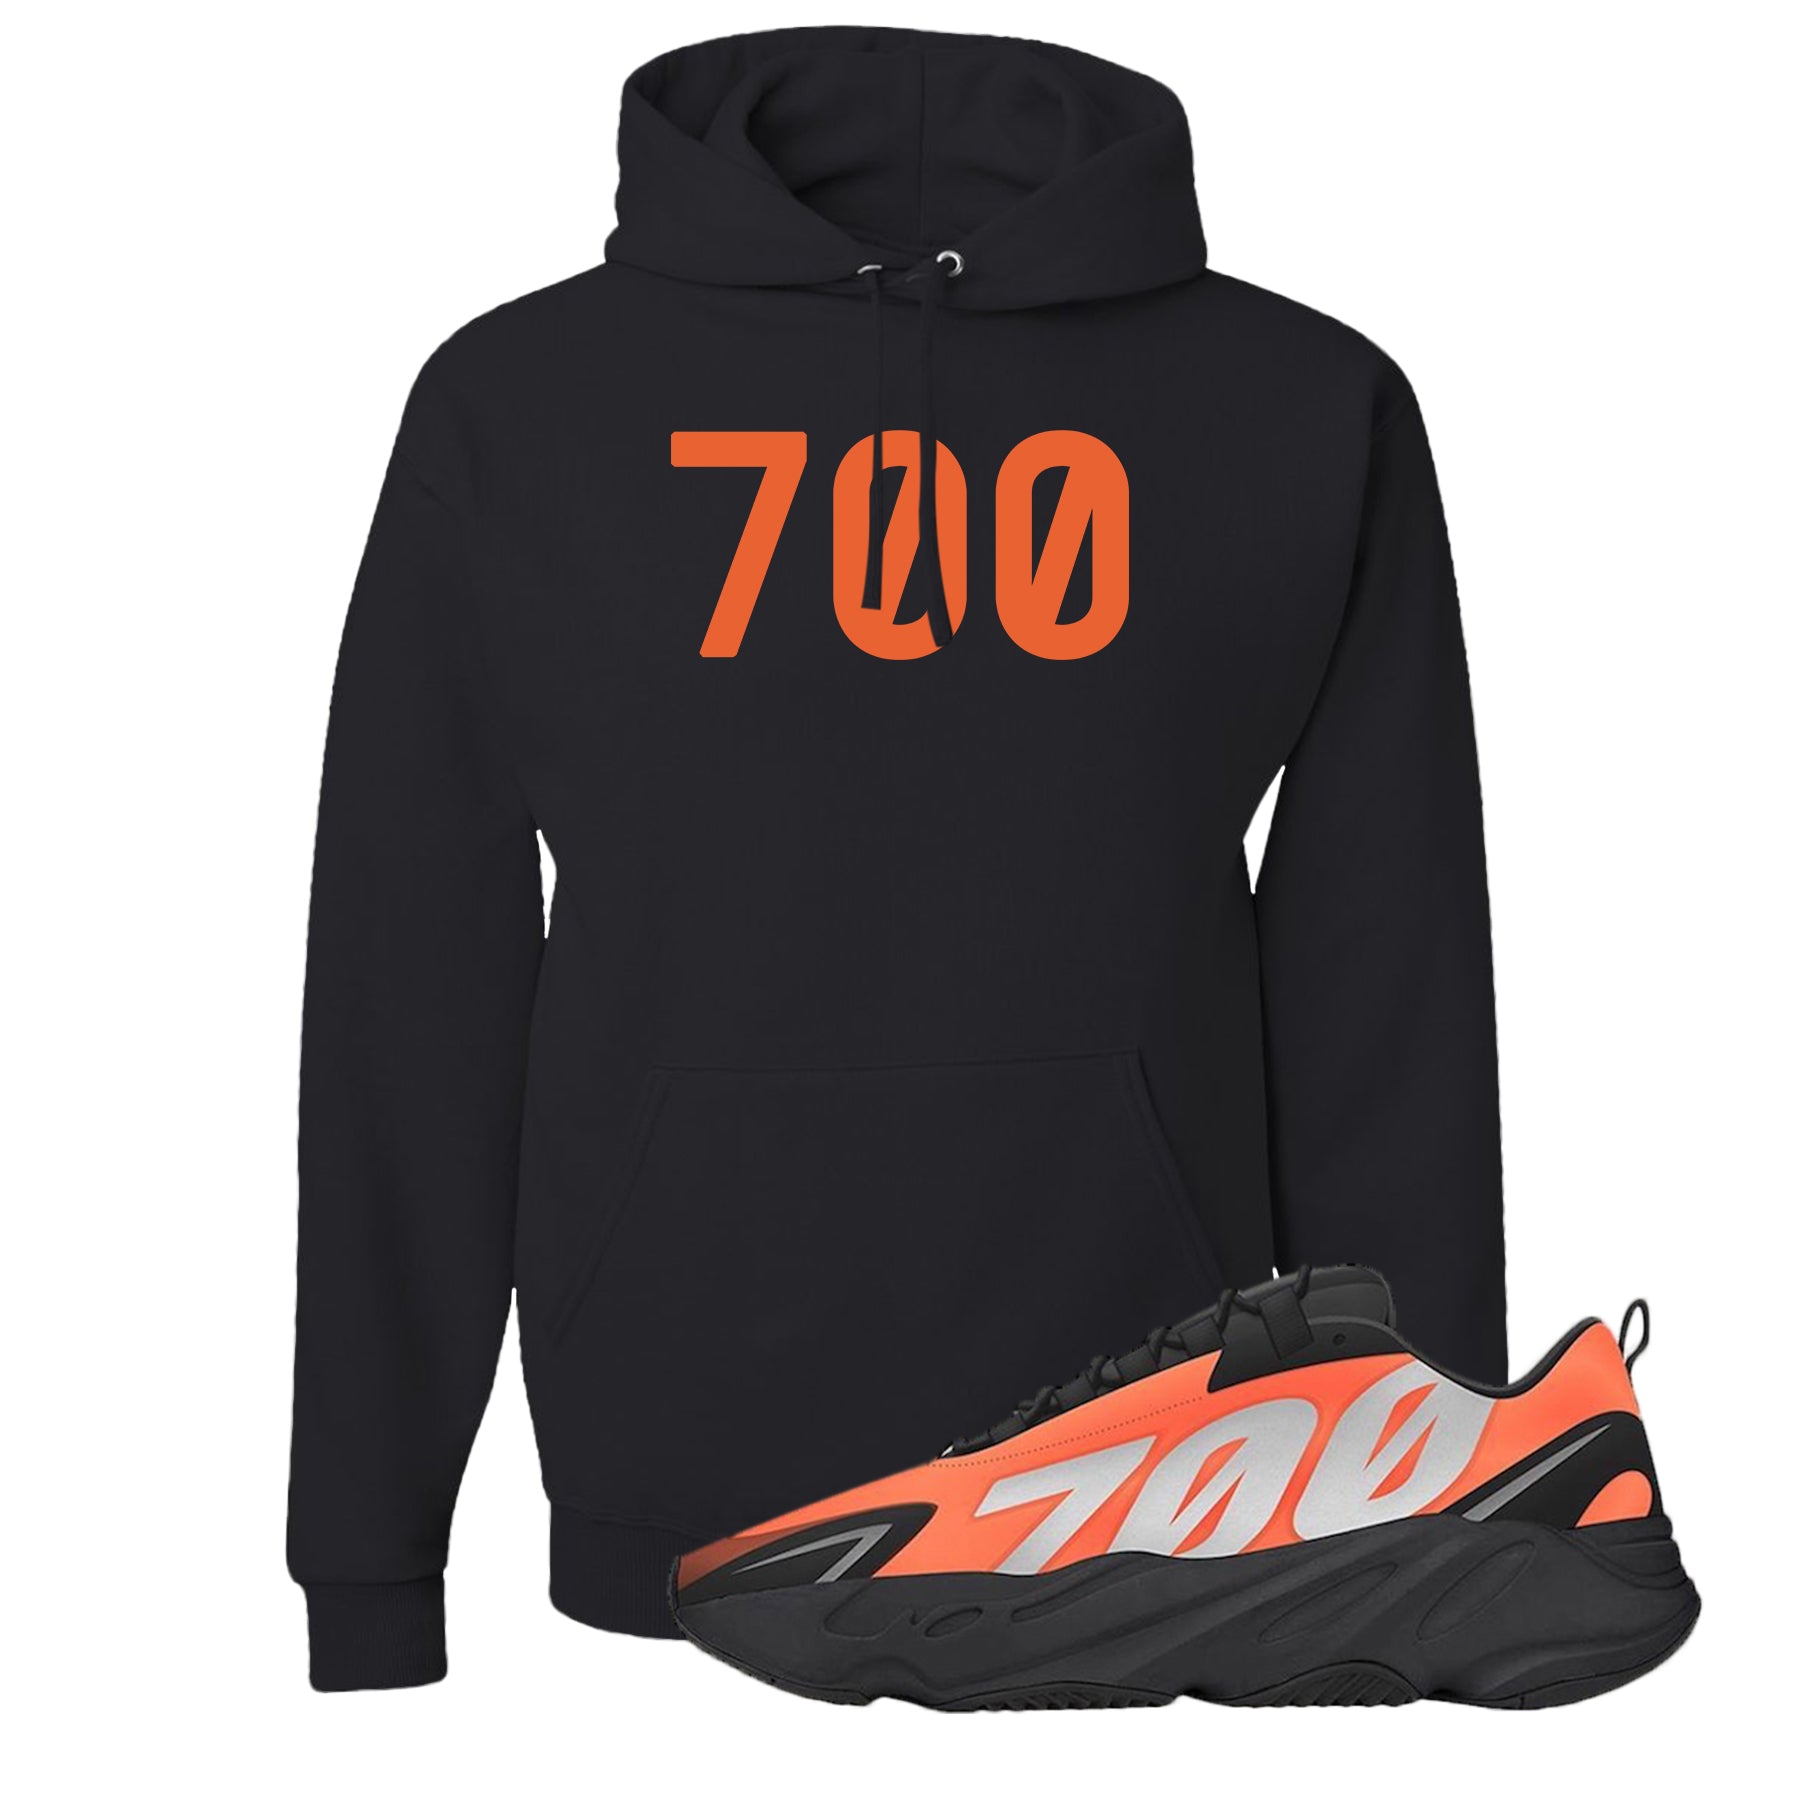 hoodie to match yeezy 700